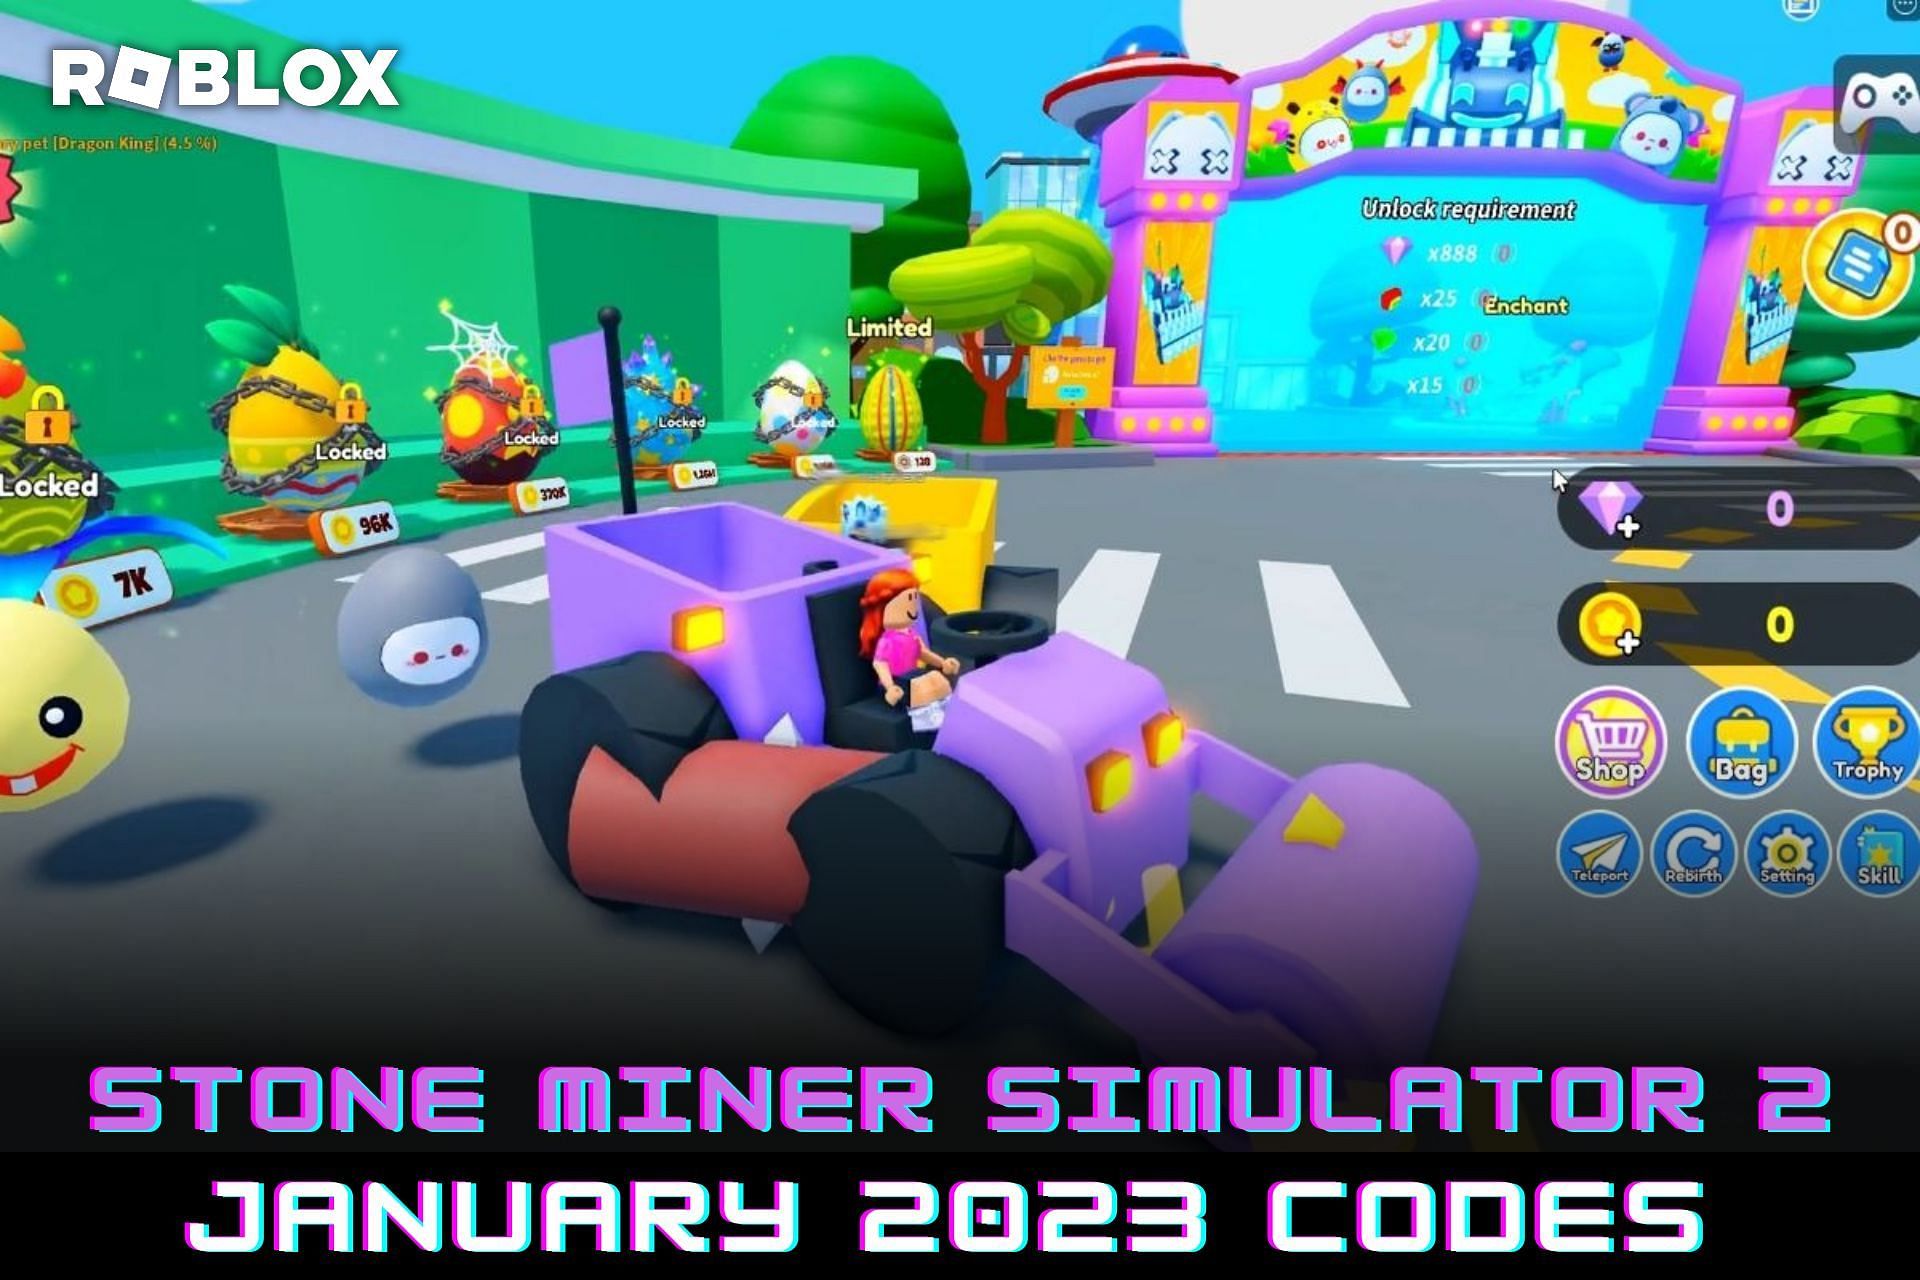 roblox-stone-miner-simulator-2-codes-for-january-2023-free-gold-gems-and-more